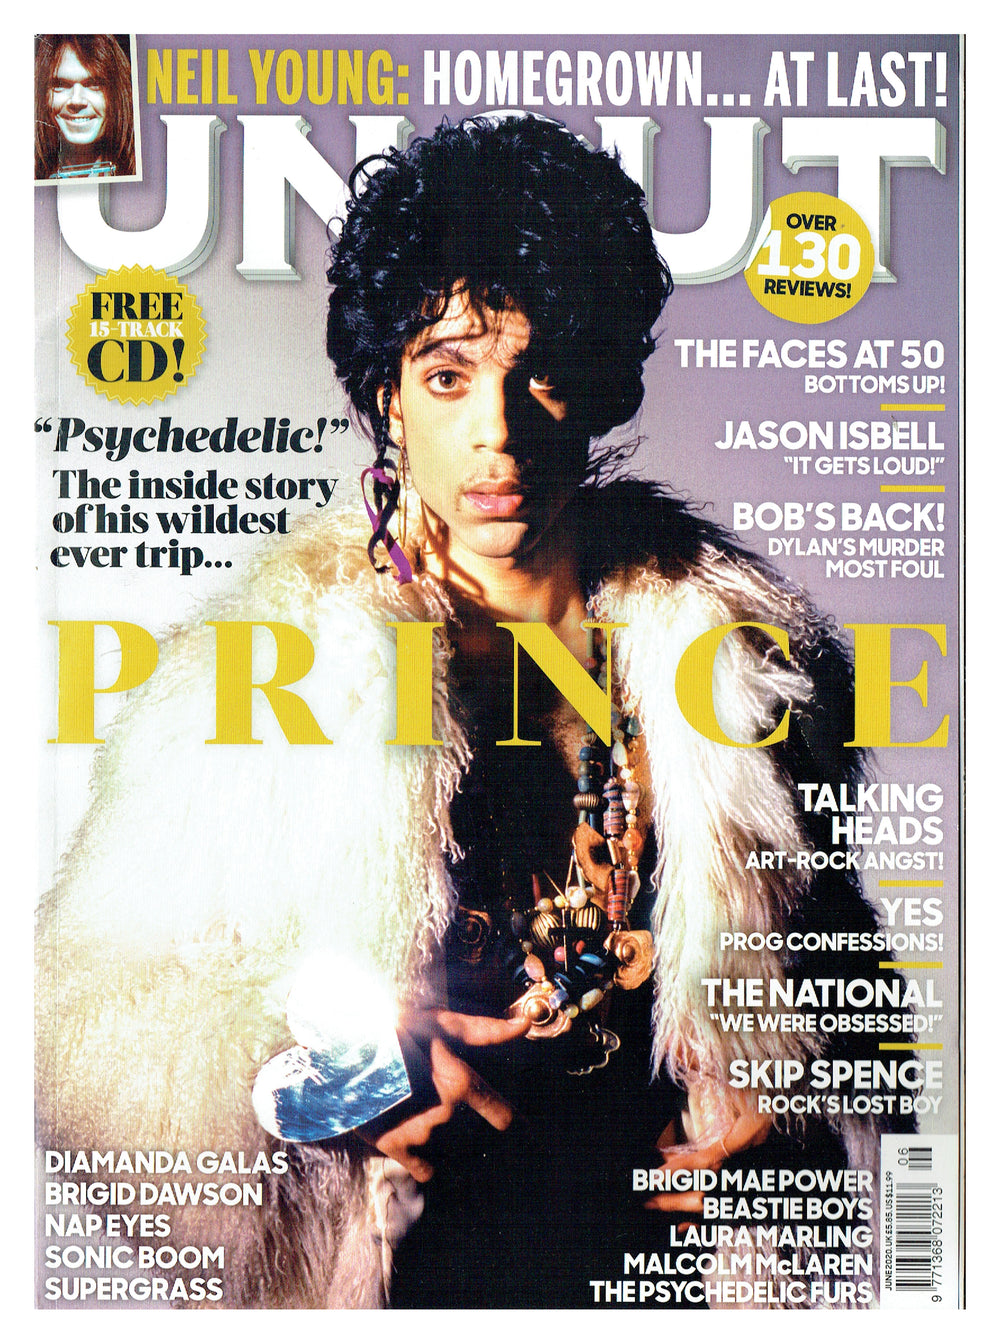 Prince – Uncut Magazine June 2020 Cover 12 & Page Article Free CD